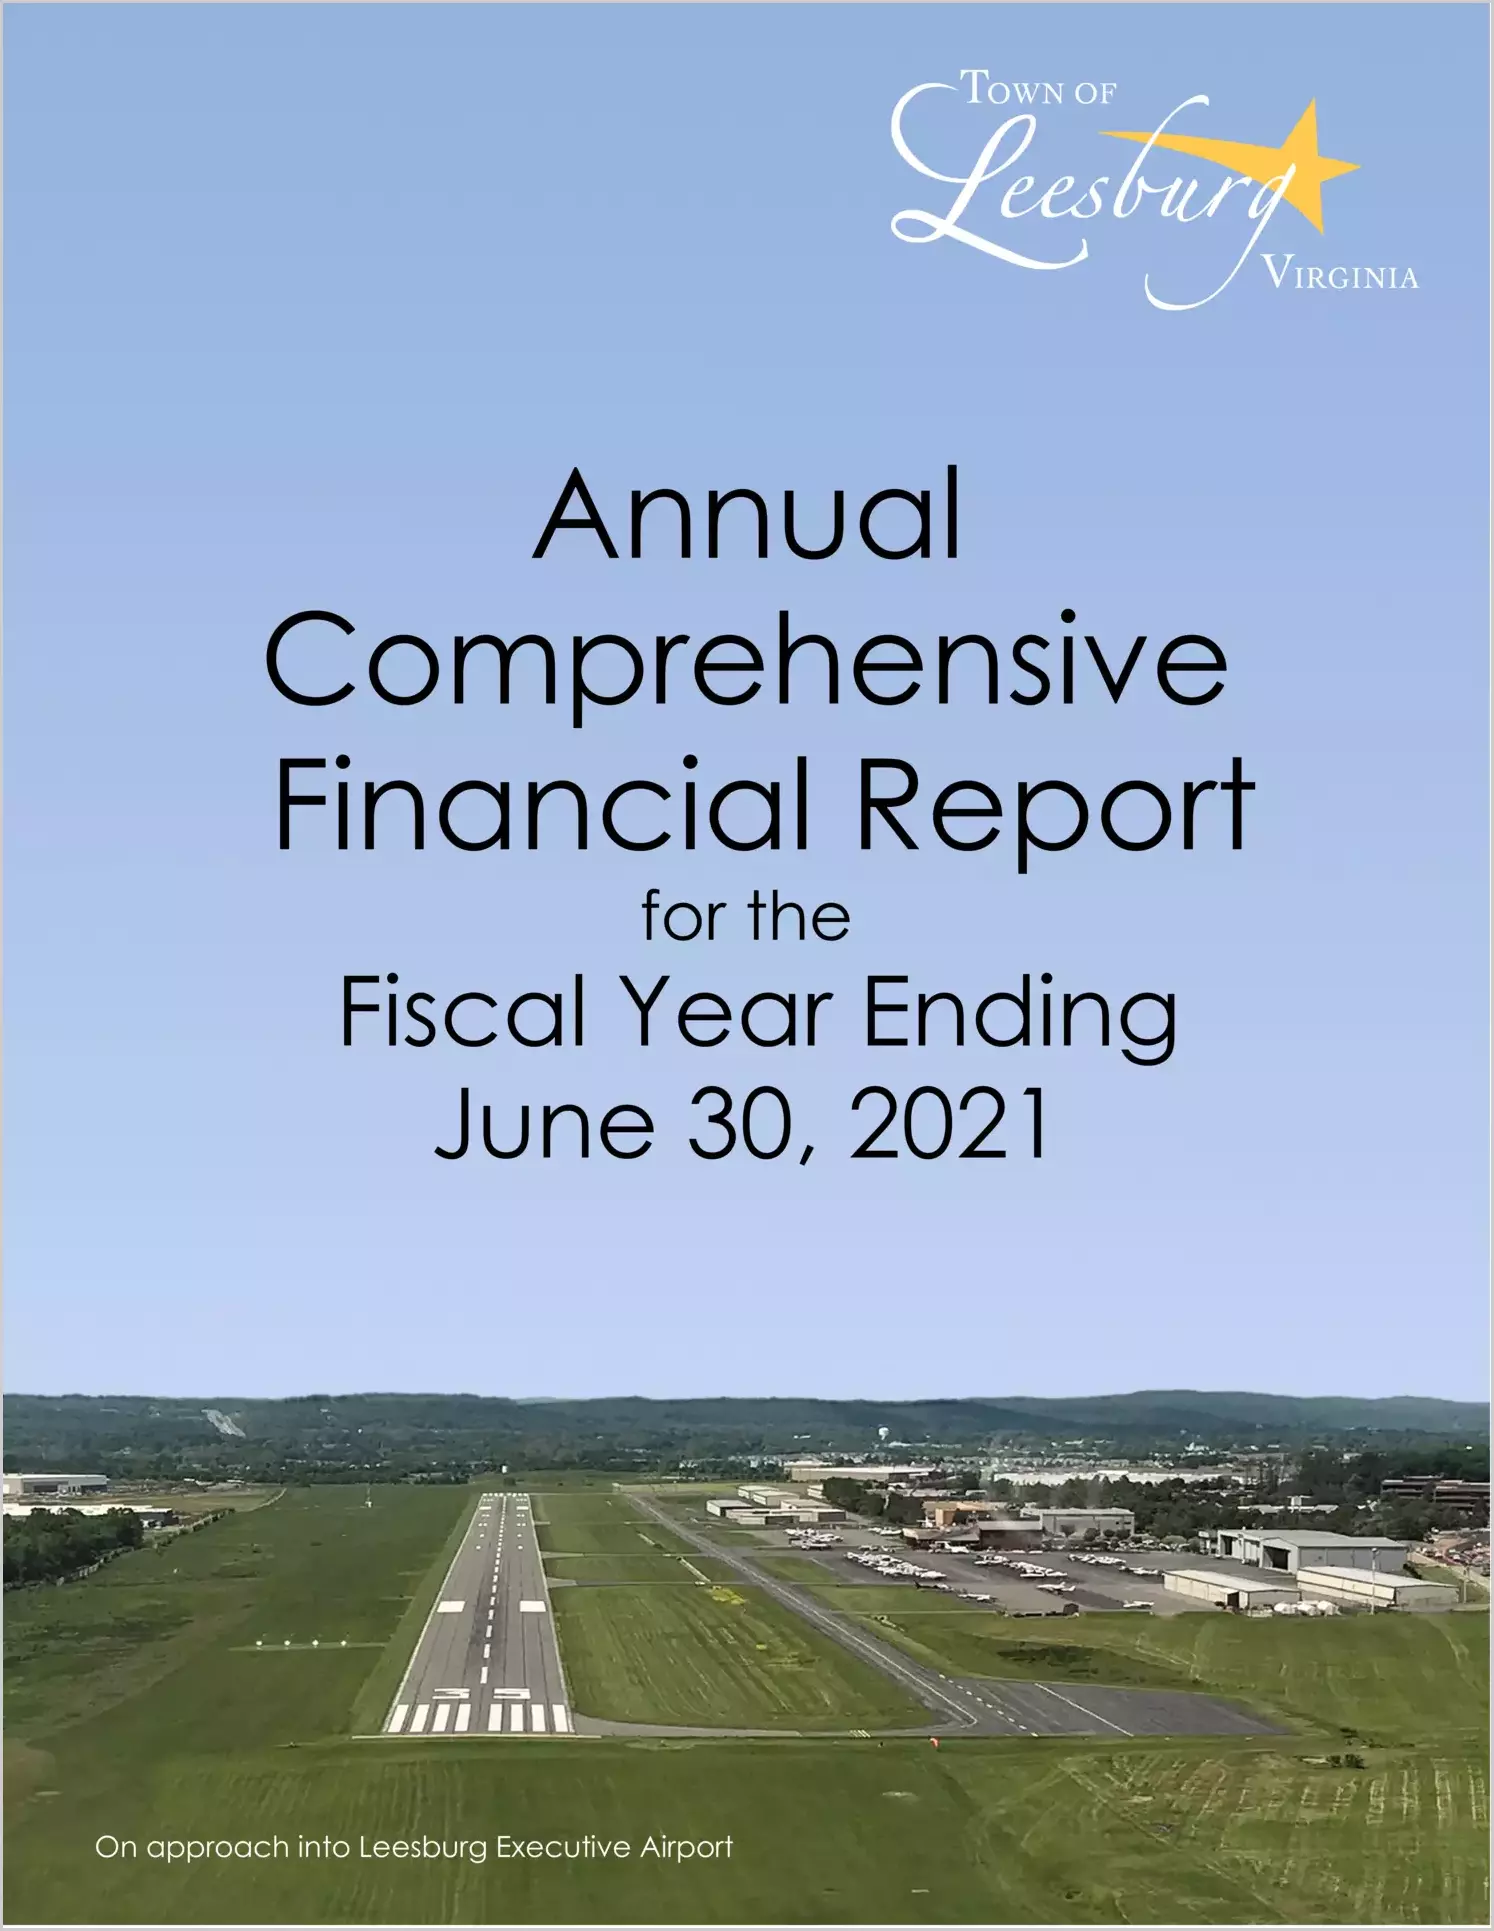 2021 Annual Financial Report for Town of Leesburg